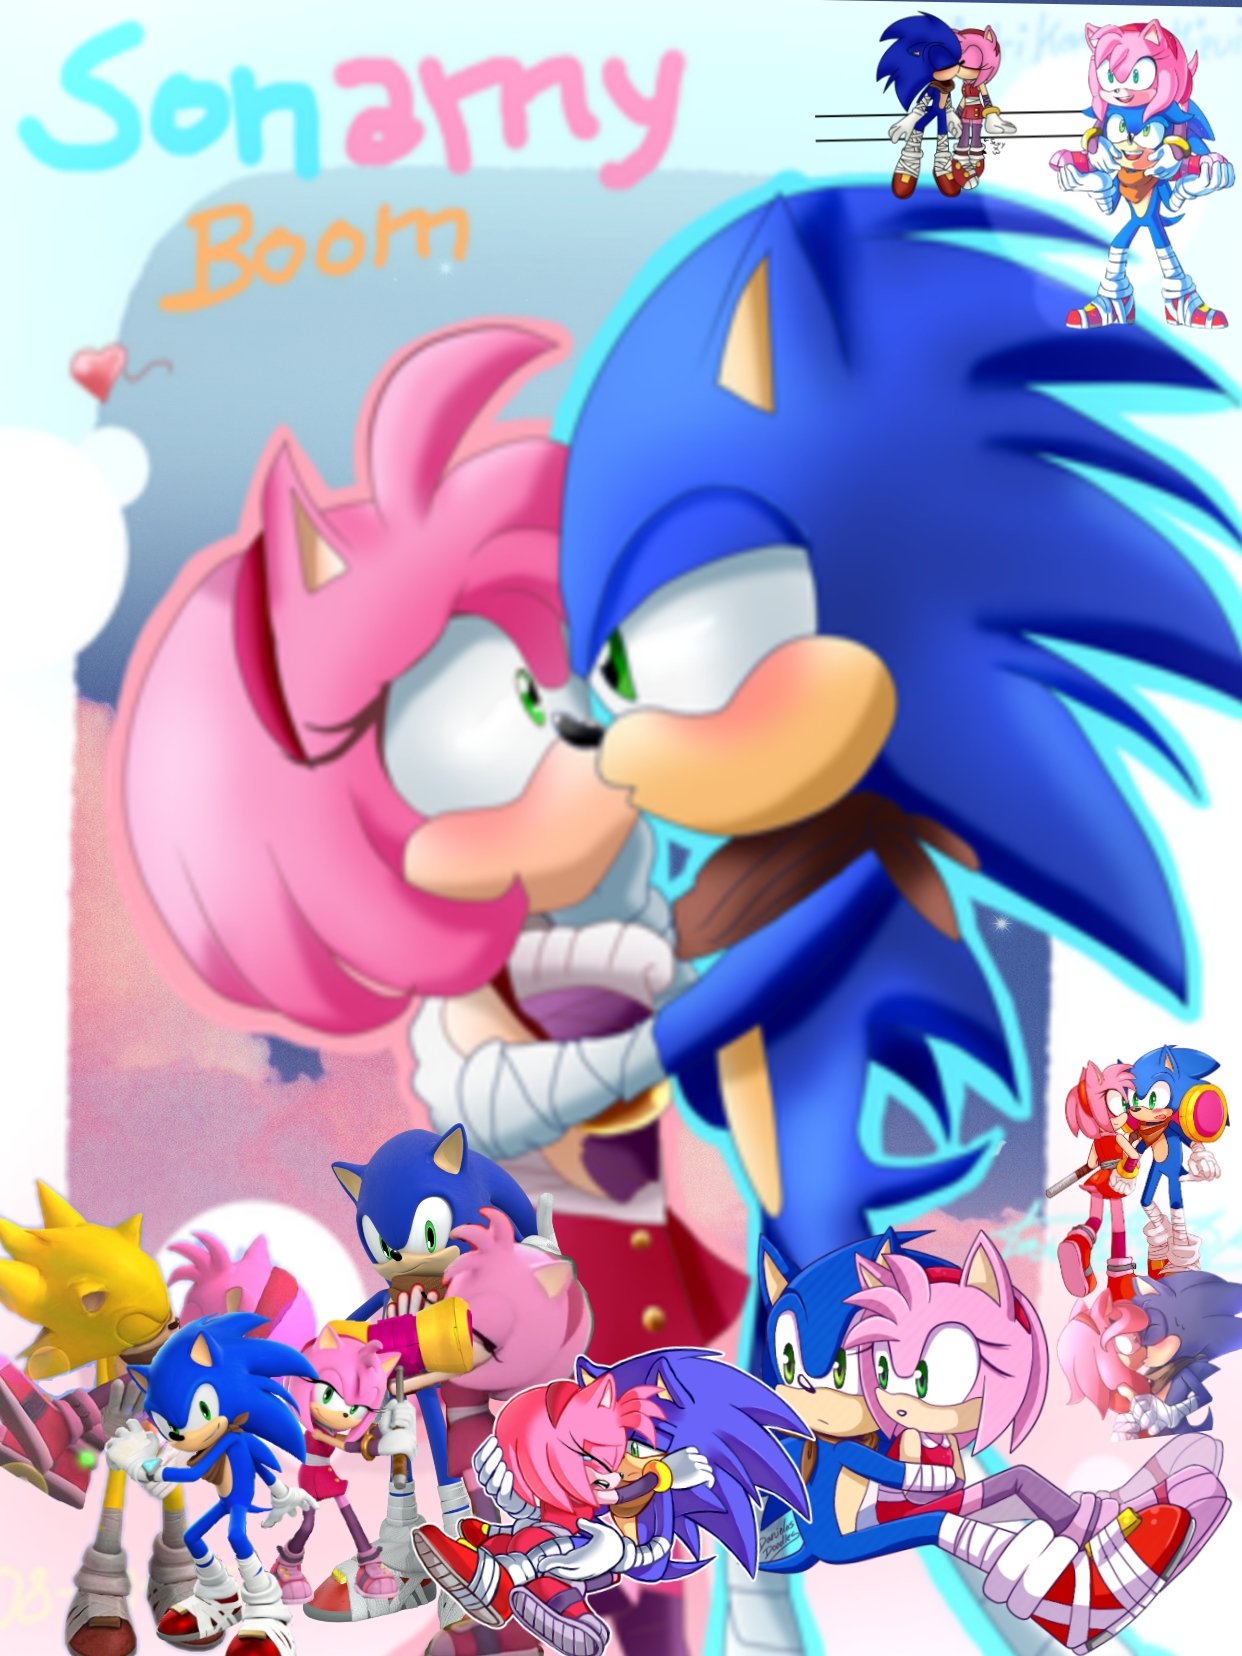 Sonic & Amy love added a new photo. - Sonic & Amy love